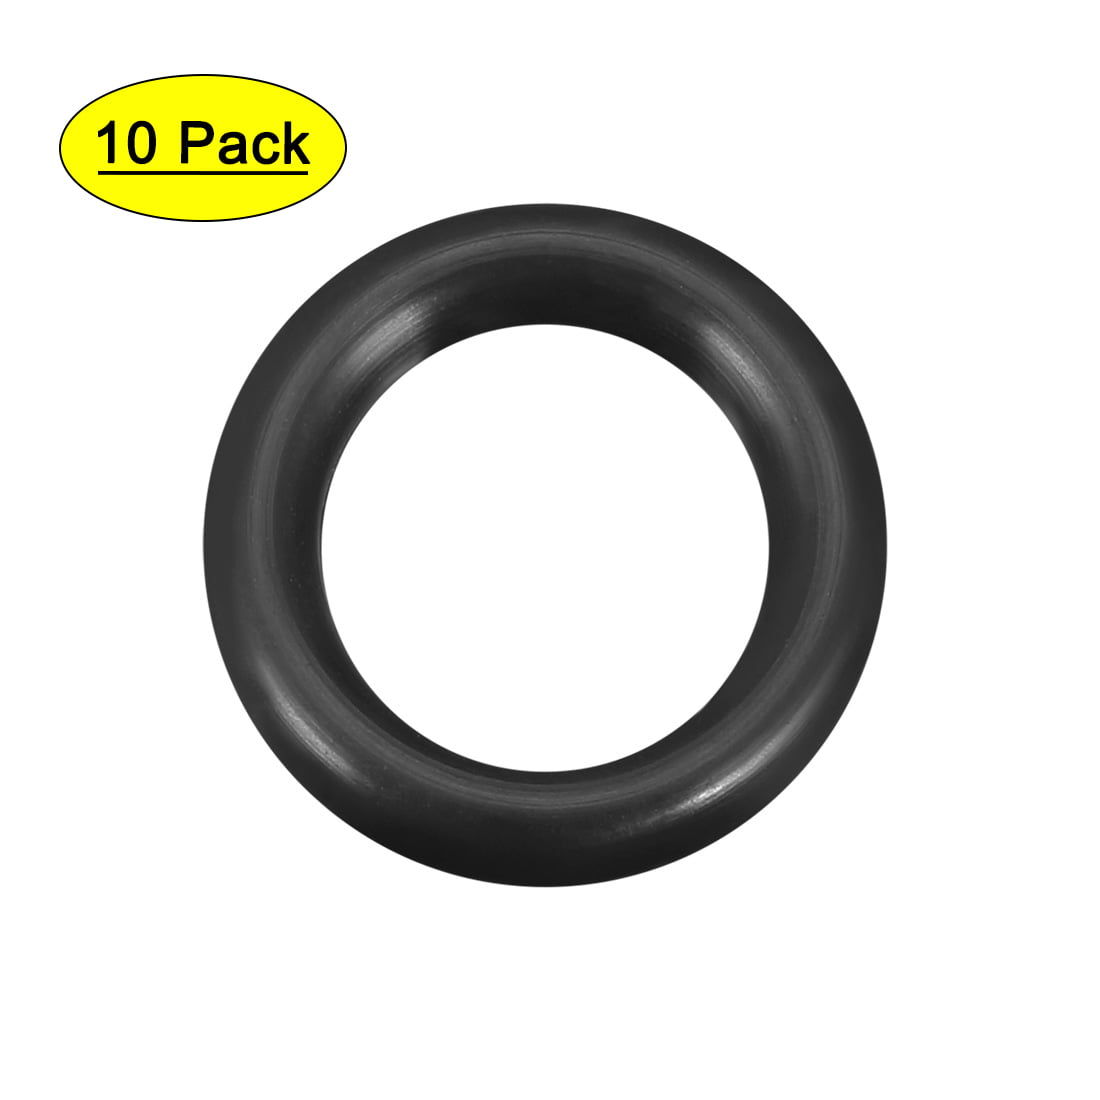 10pcs Metric 100mm OD 4mm Thickness Industrial Rubber O Ring Seal Black 